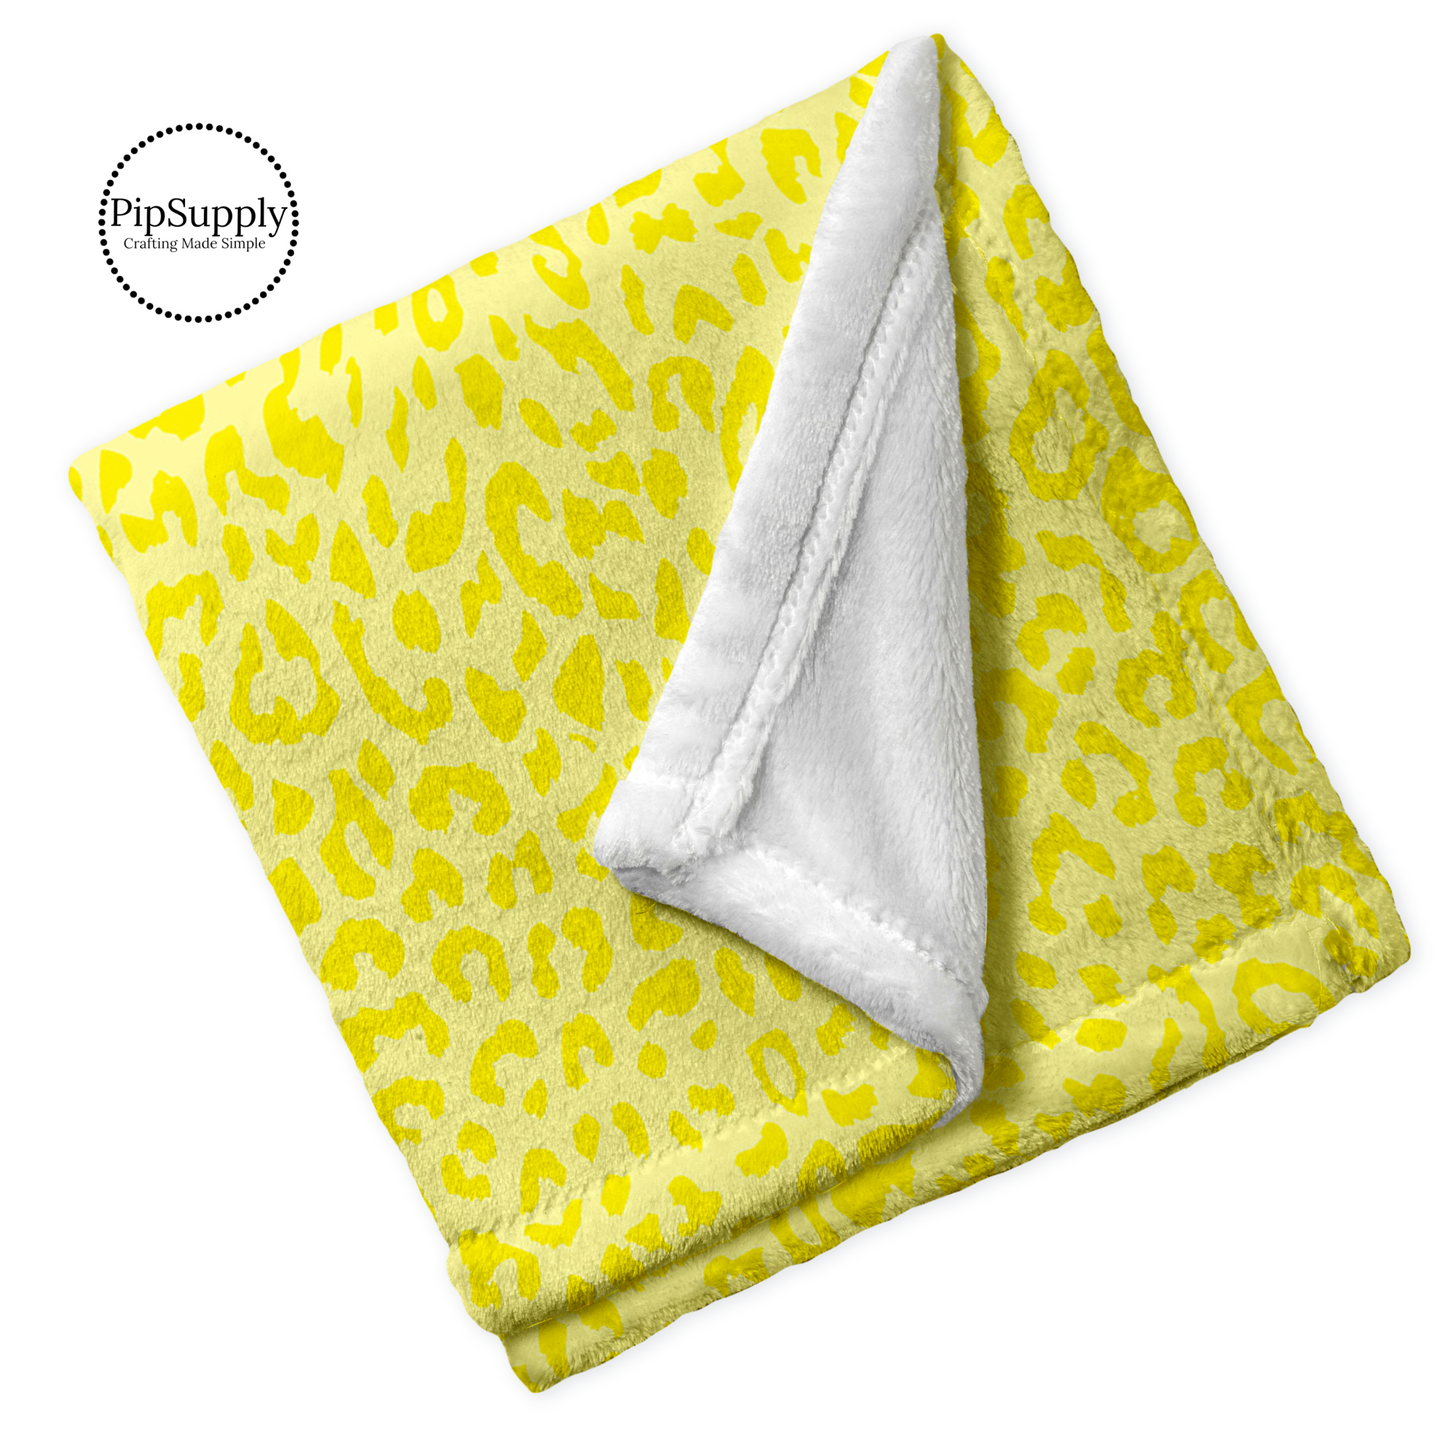 Soft folded minky blanket with yellow leopard animal print.